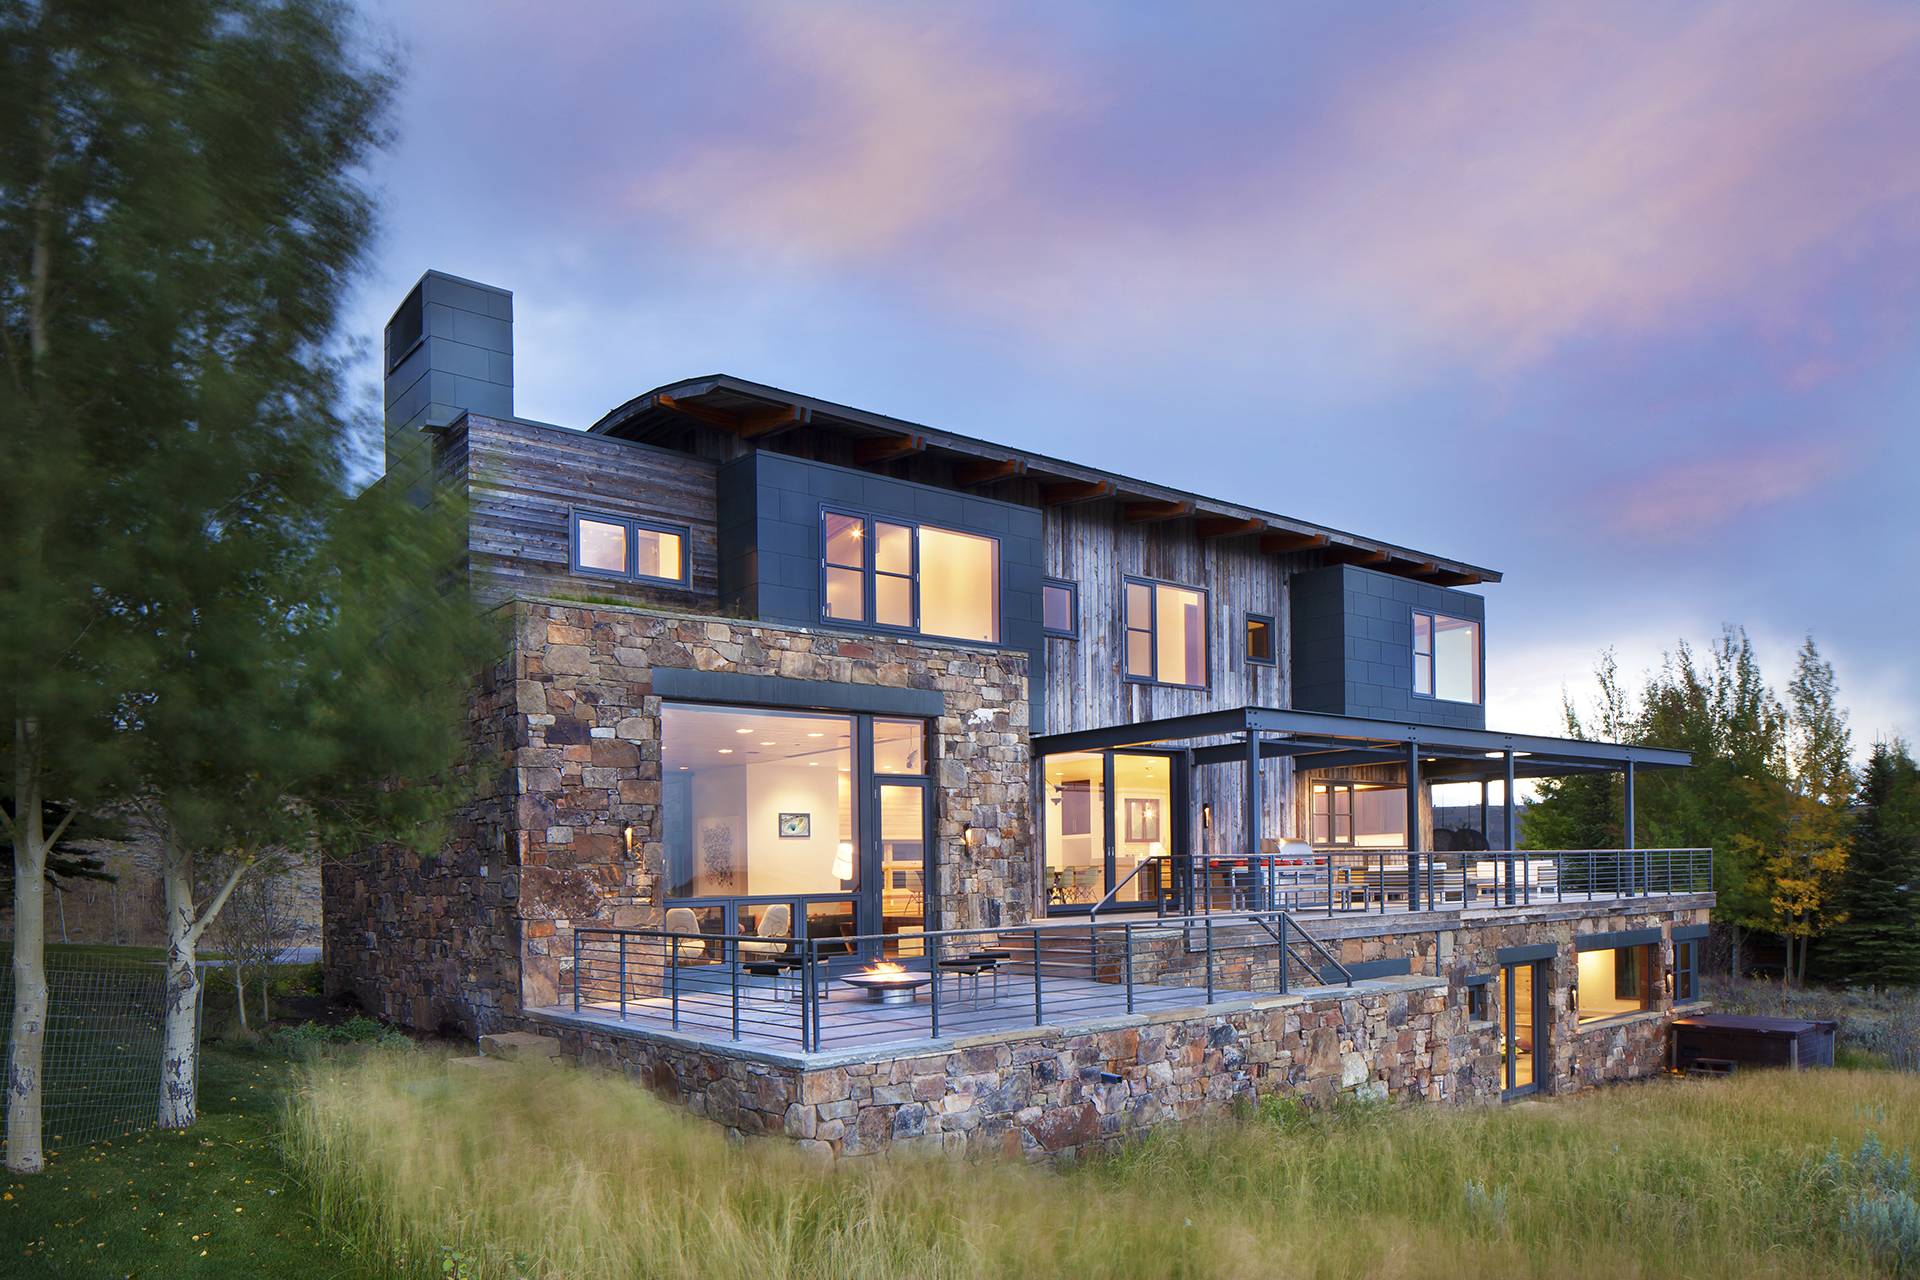 “The Jackson Tech House”: A Whimsical Family Retreat With Stunning
Views